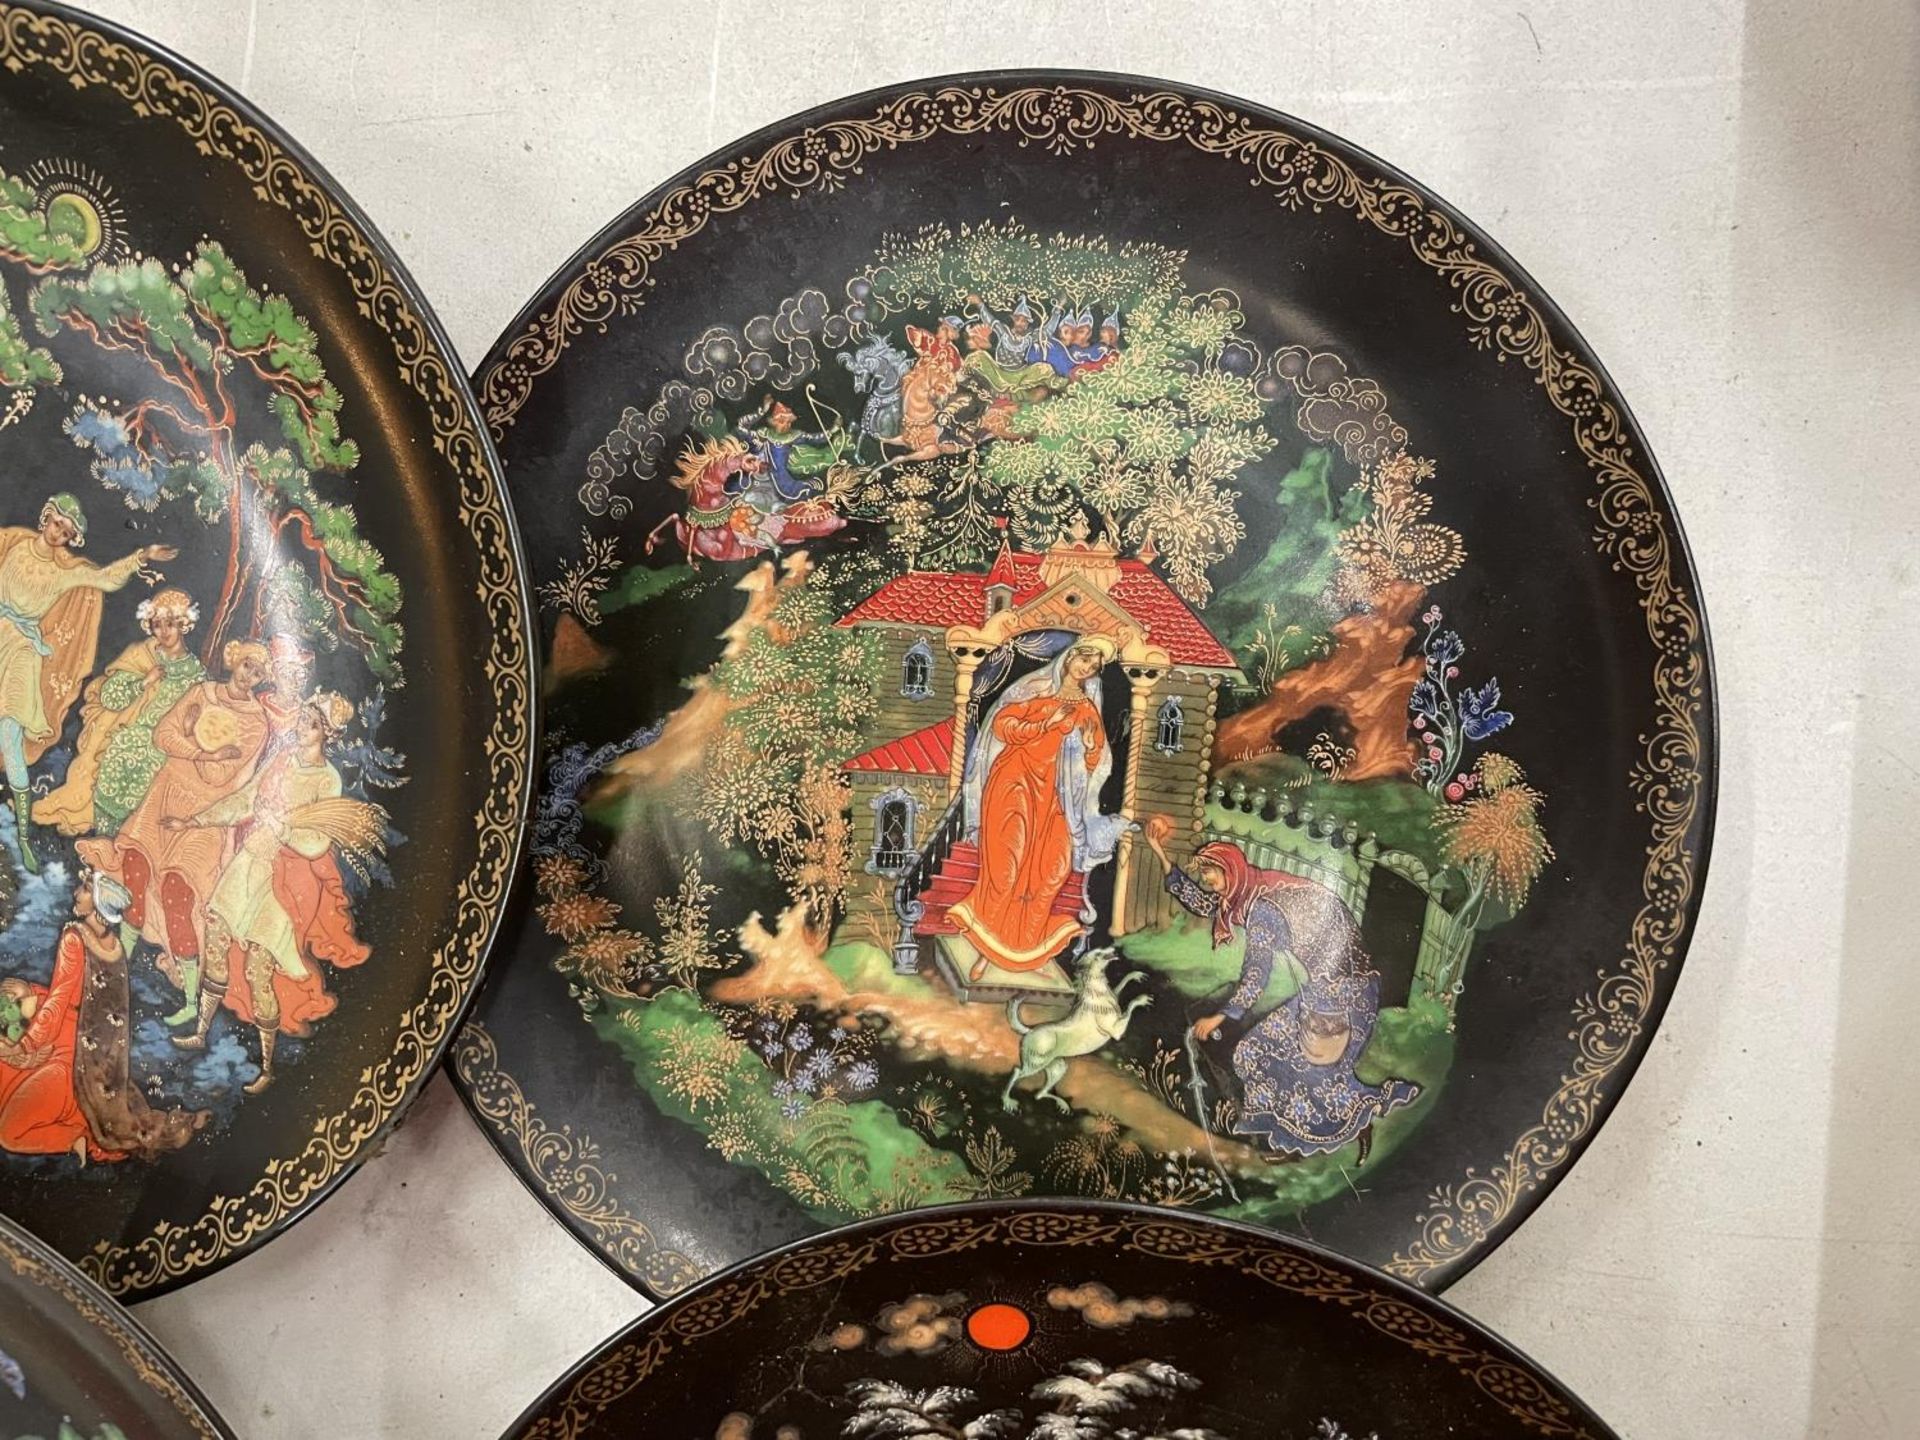 FOUR BRADEX COLLECTORS PLATES OF EASTERN EUROPEAN FAIRYTALE SCENES - Image 3 of 7